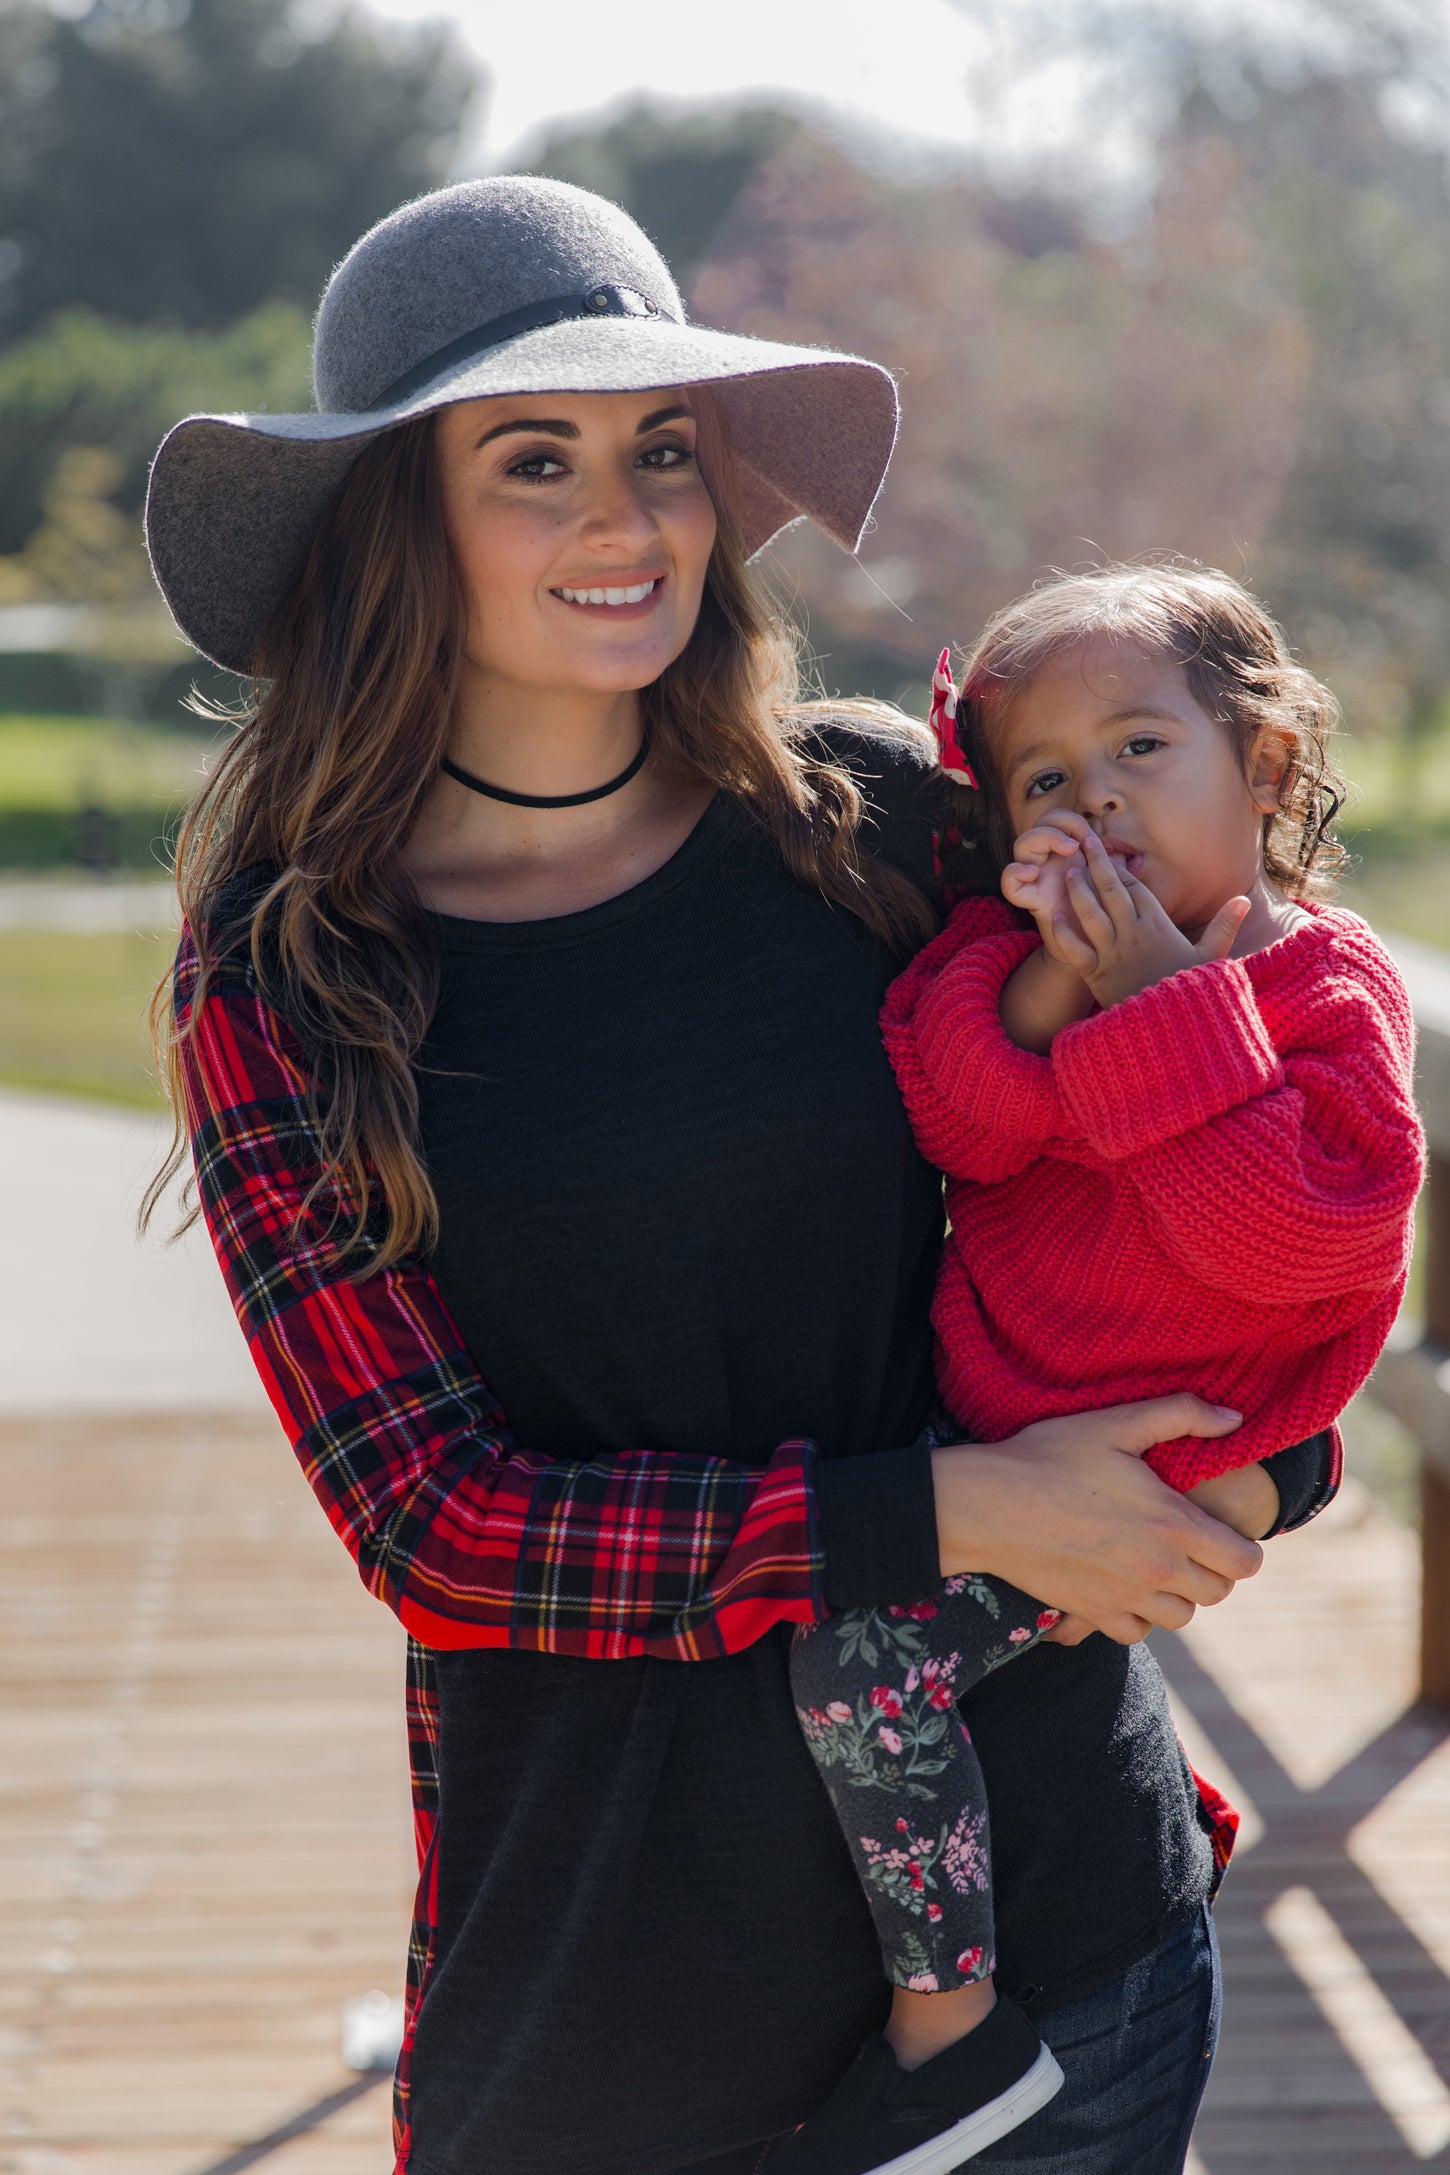 Charcoal Plaid Accent Maternity Top